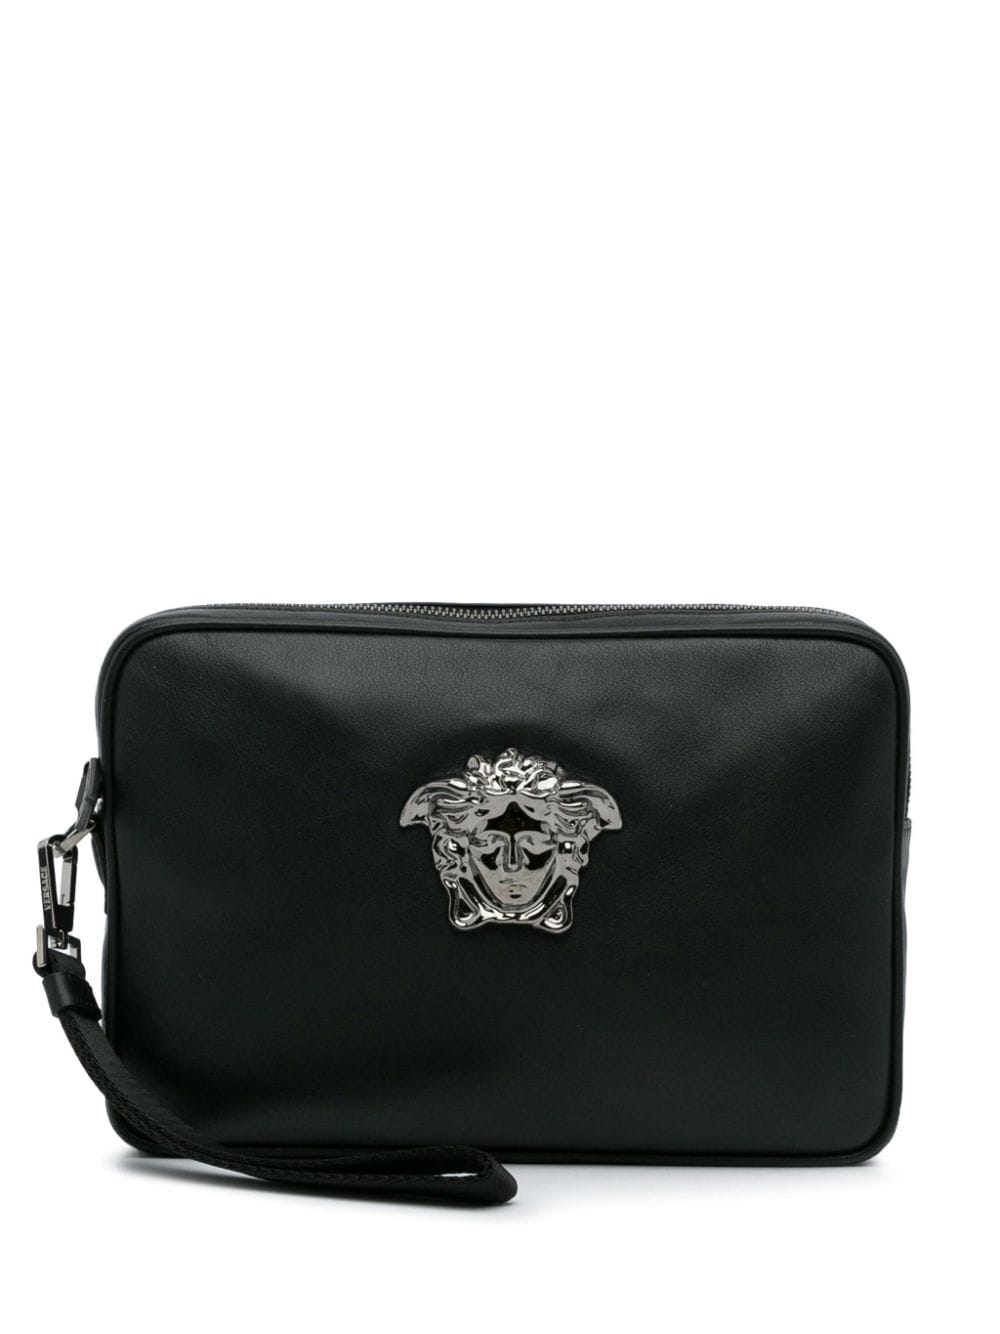 Pre-owned Versace Medusa Leather Clutch Bag In Black